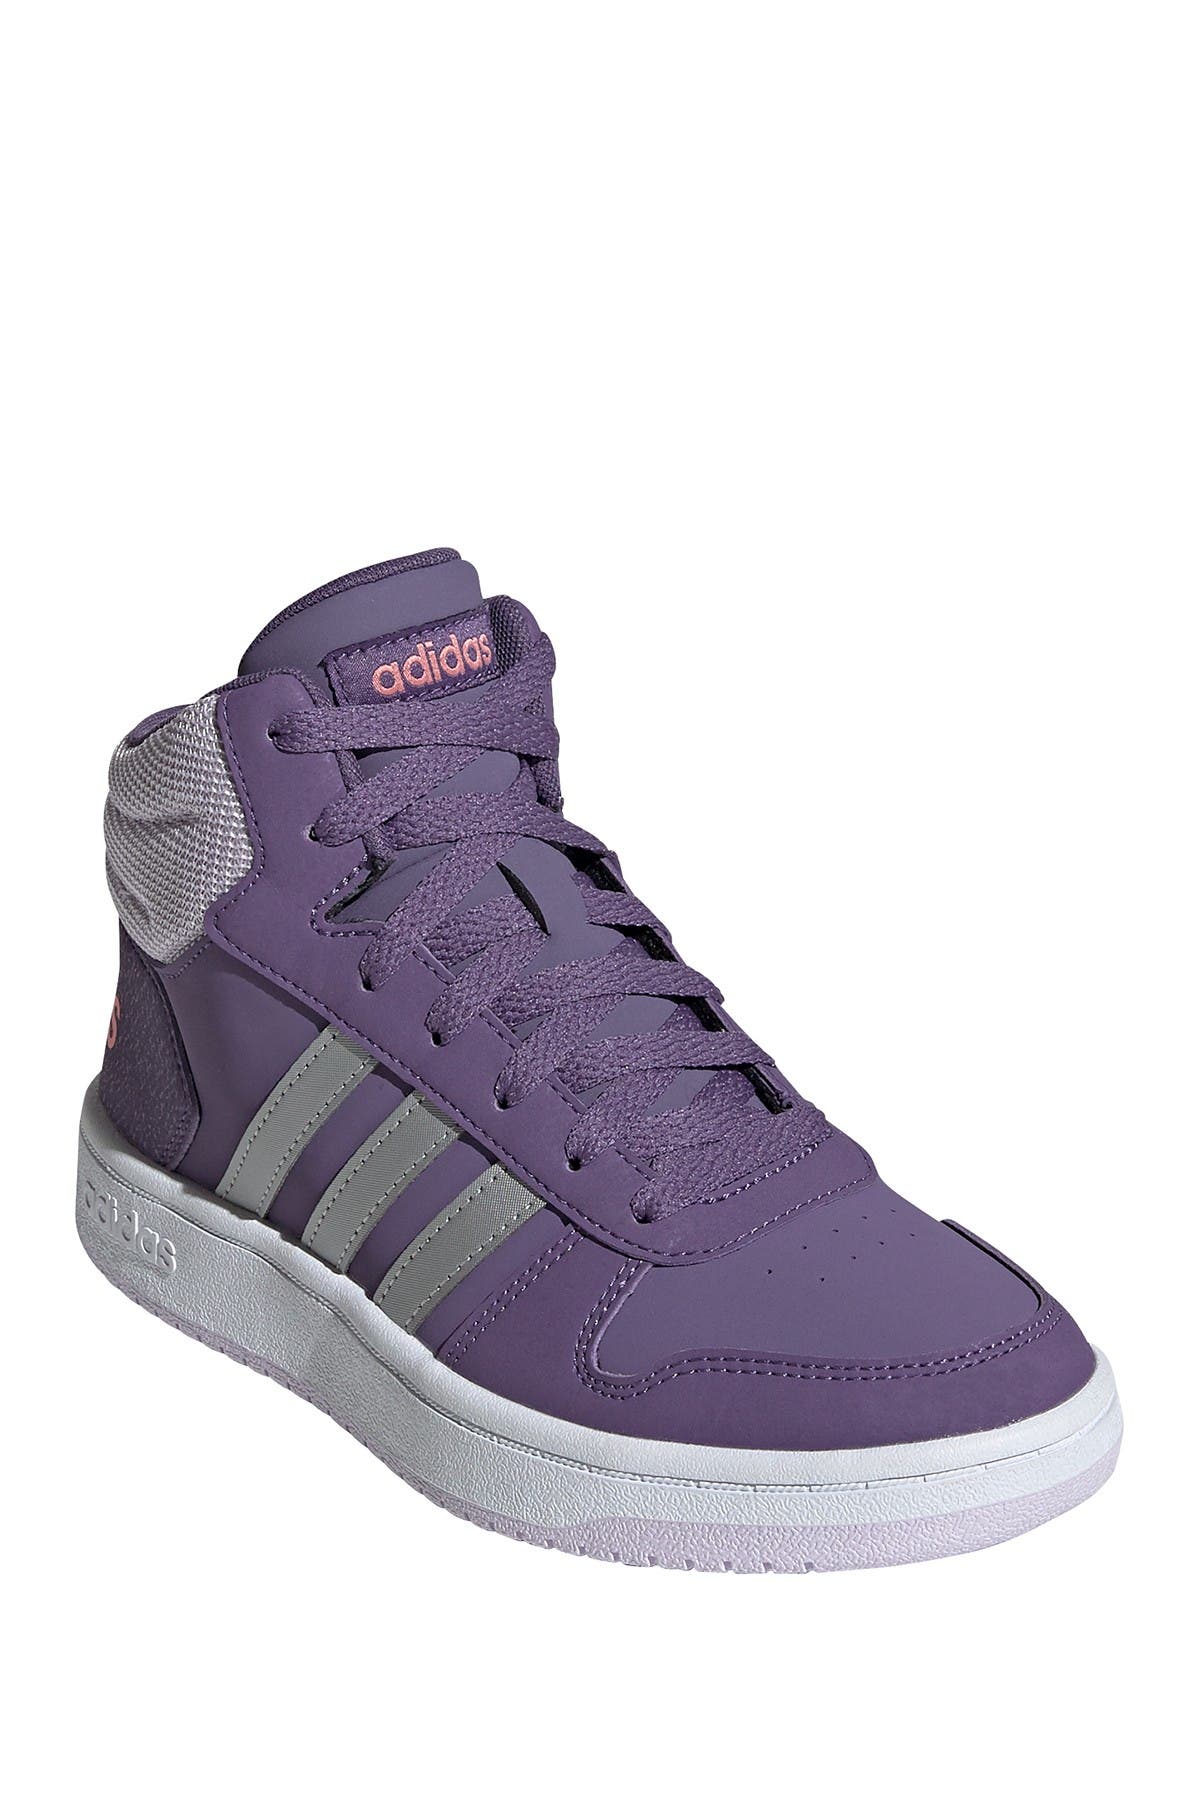 hoops 2.0 mid shoes womens